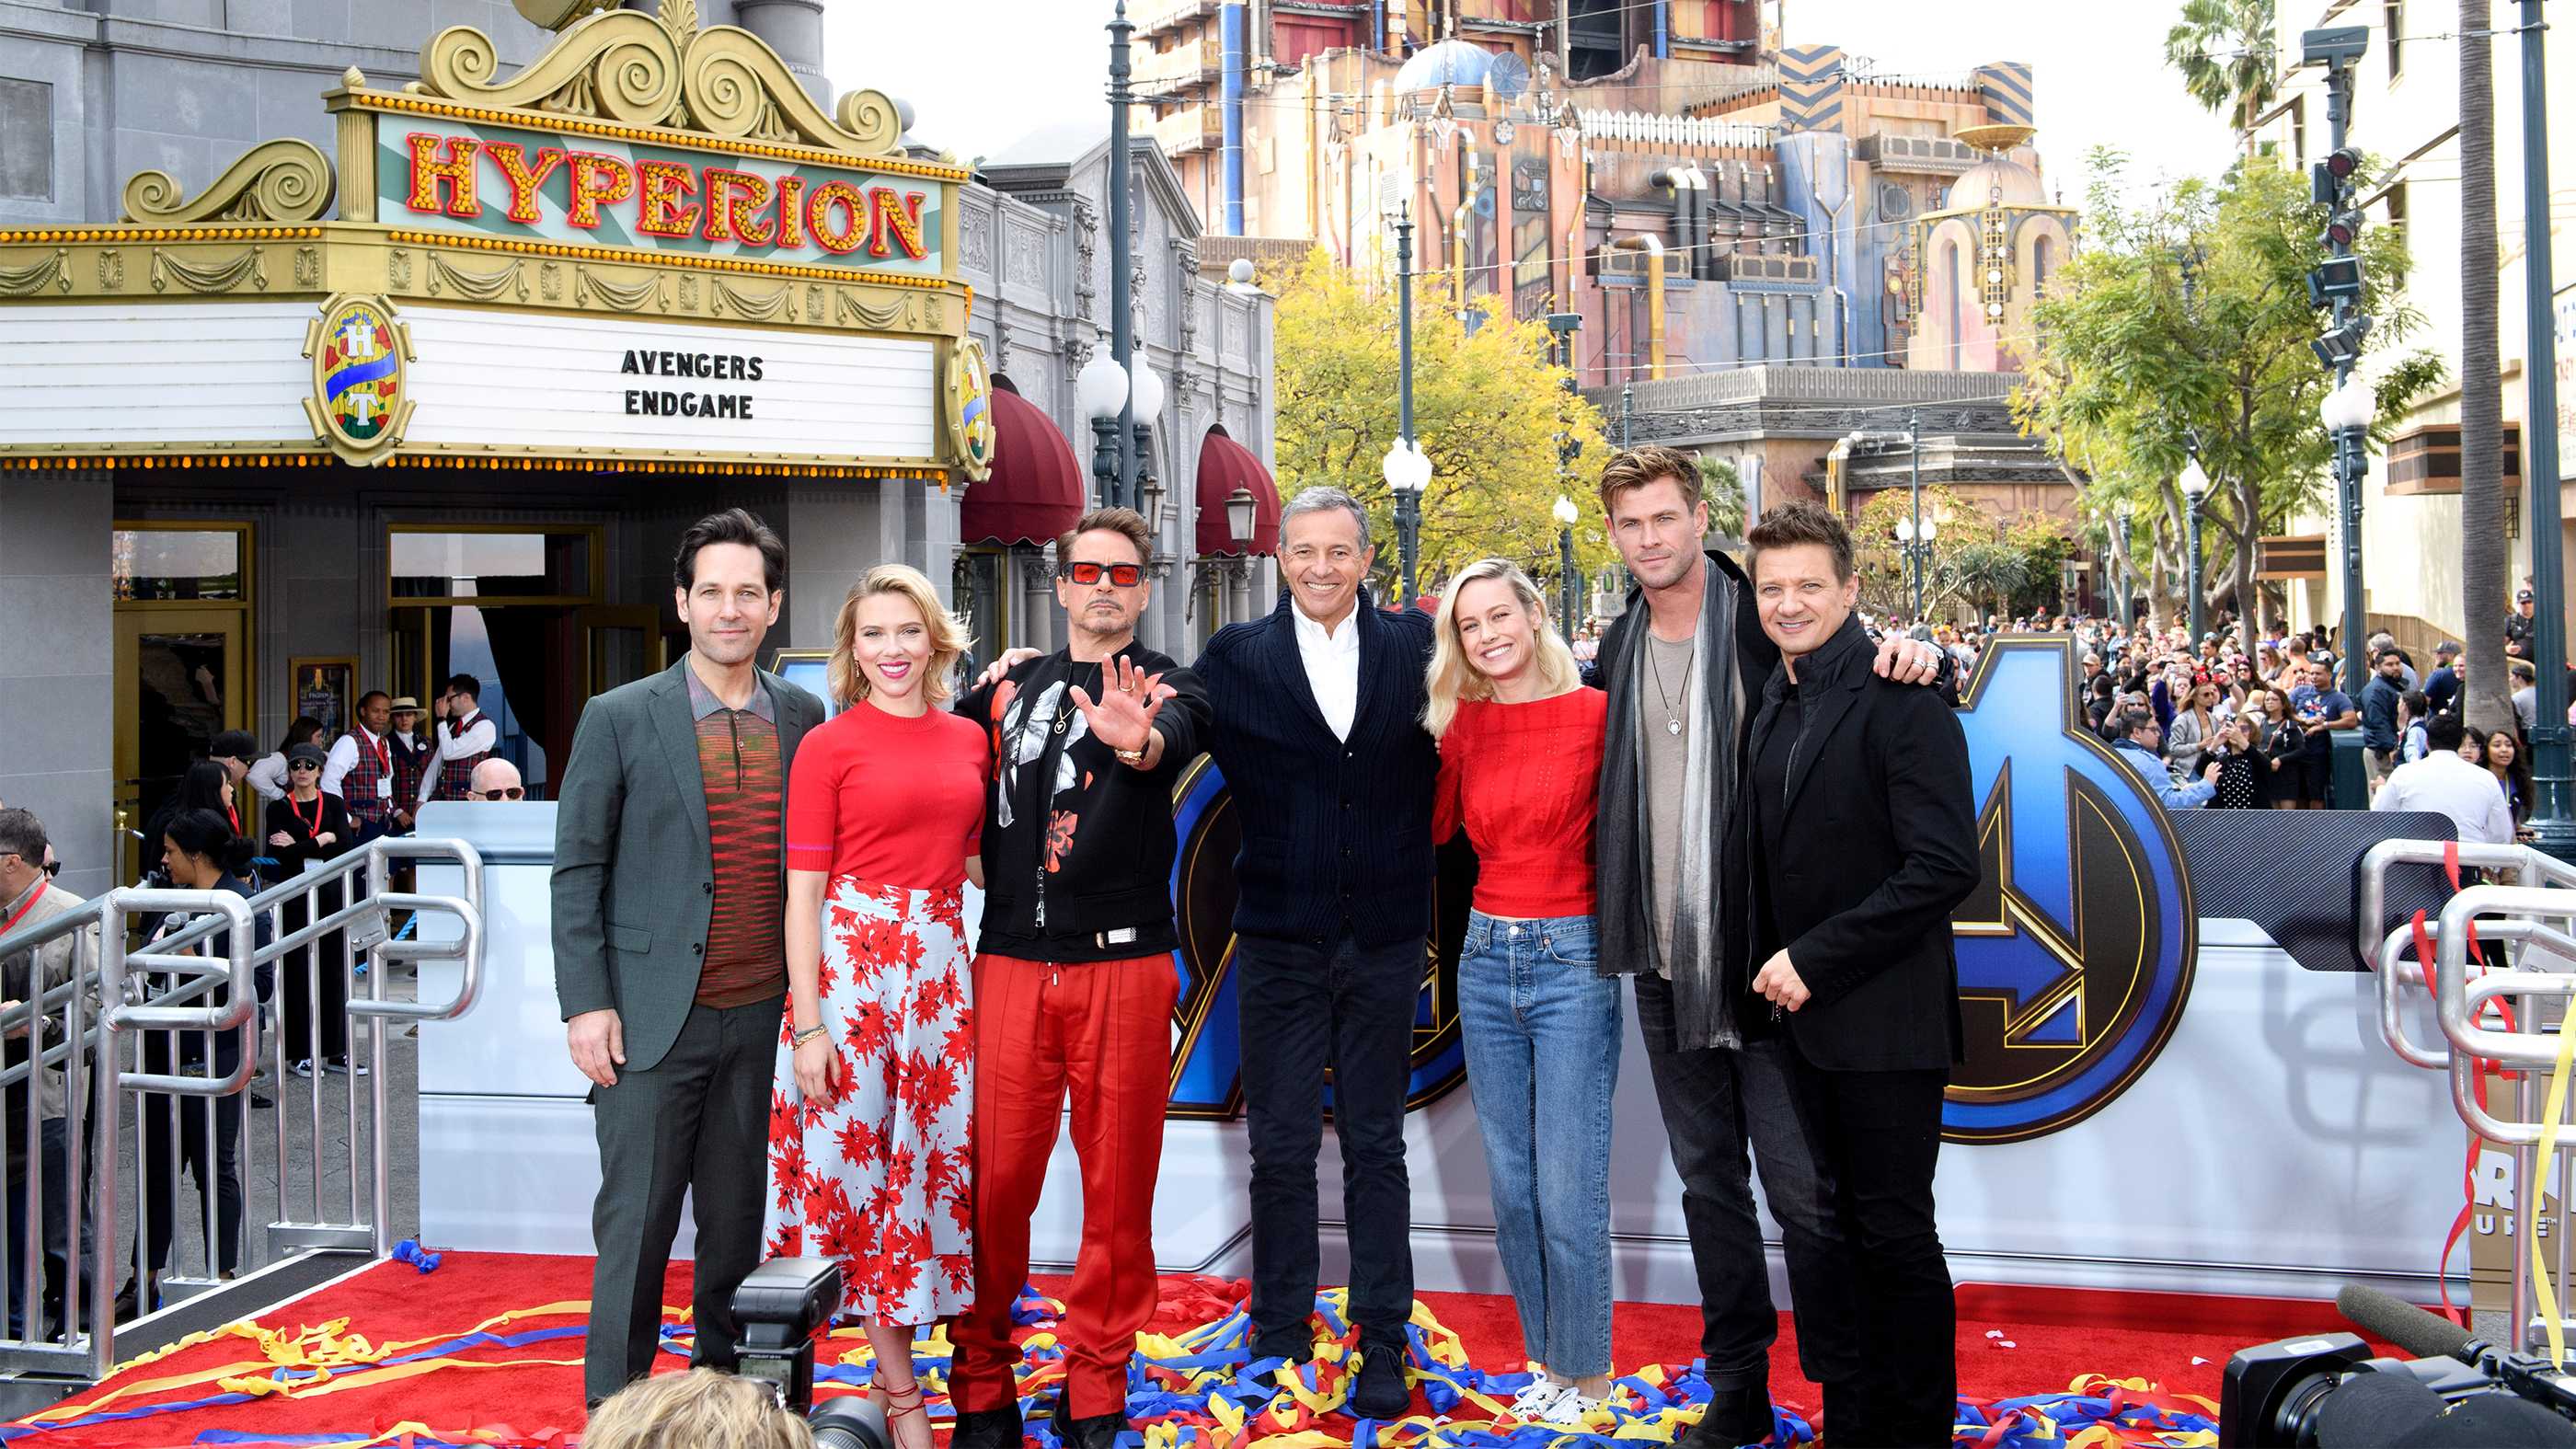 Walt Disney chief executive Bob Iger in Disney's Hollywood Studios with the cast of the Avengers